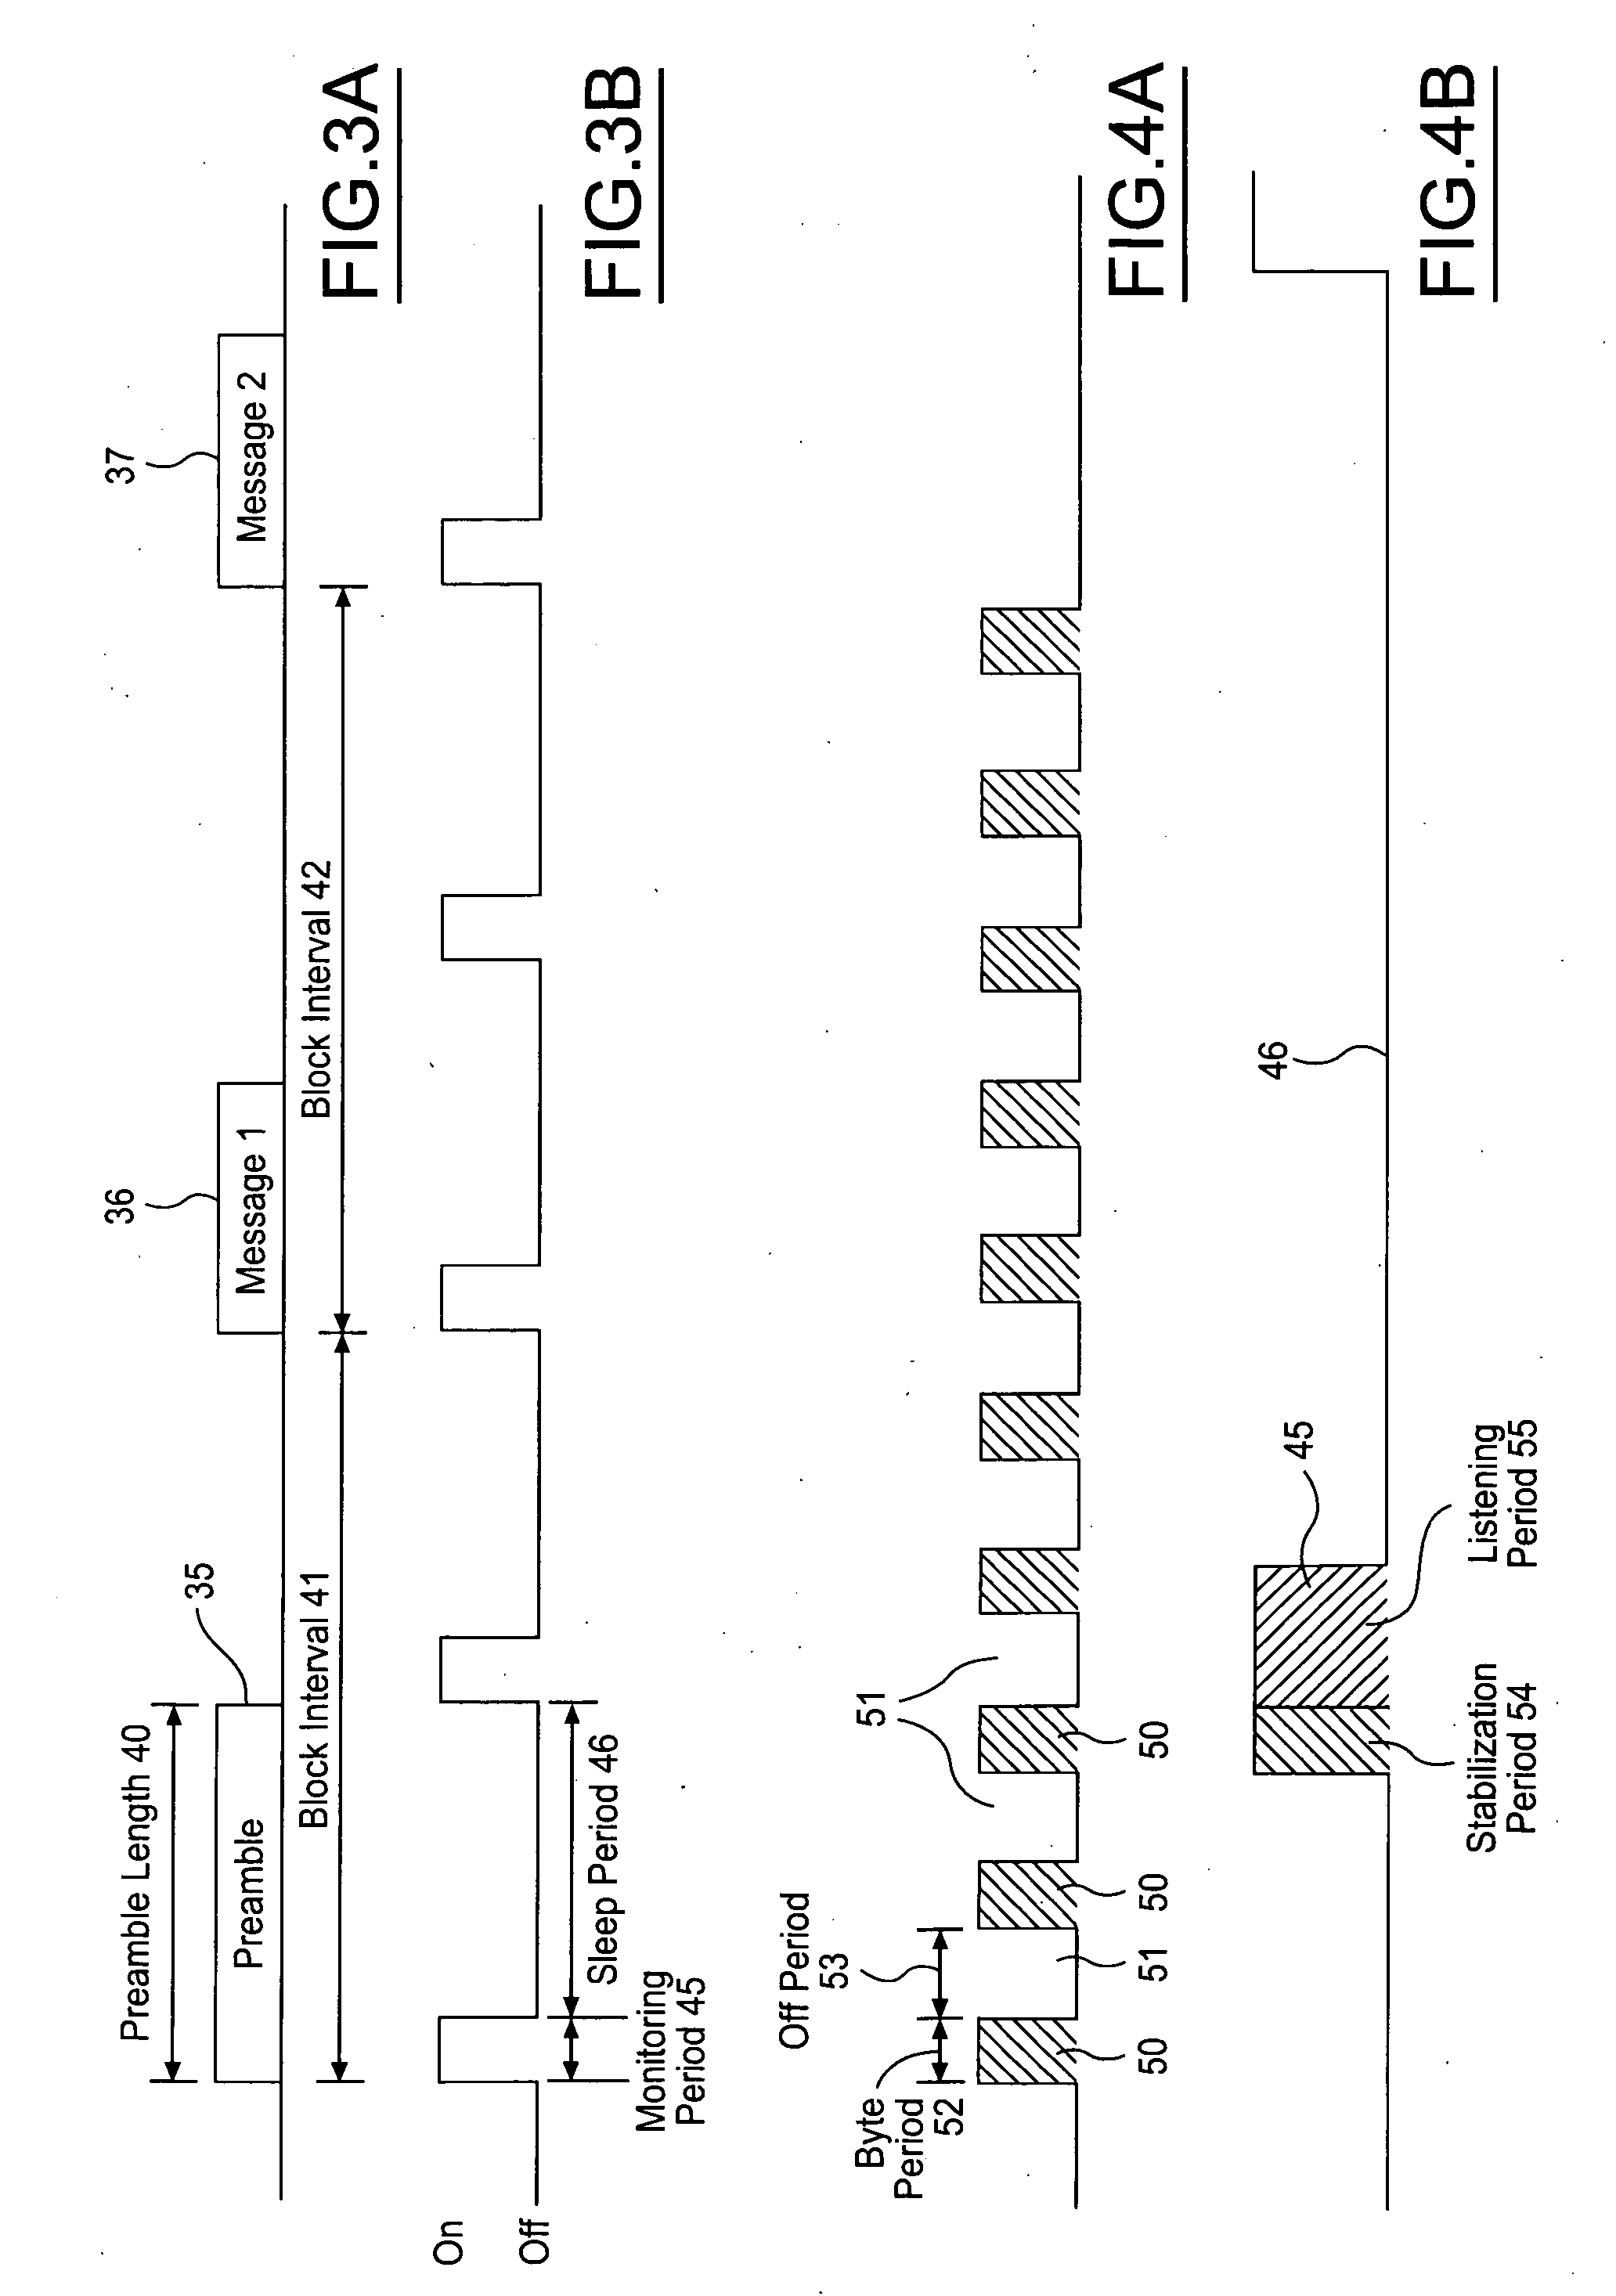 Remote entry system with increased transmit power and reduced quiescent current